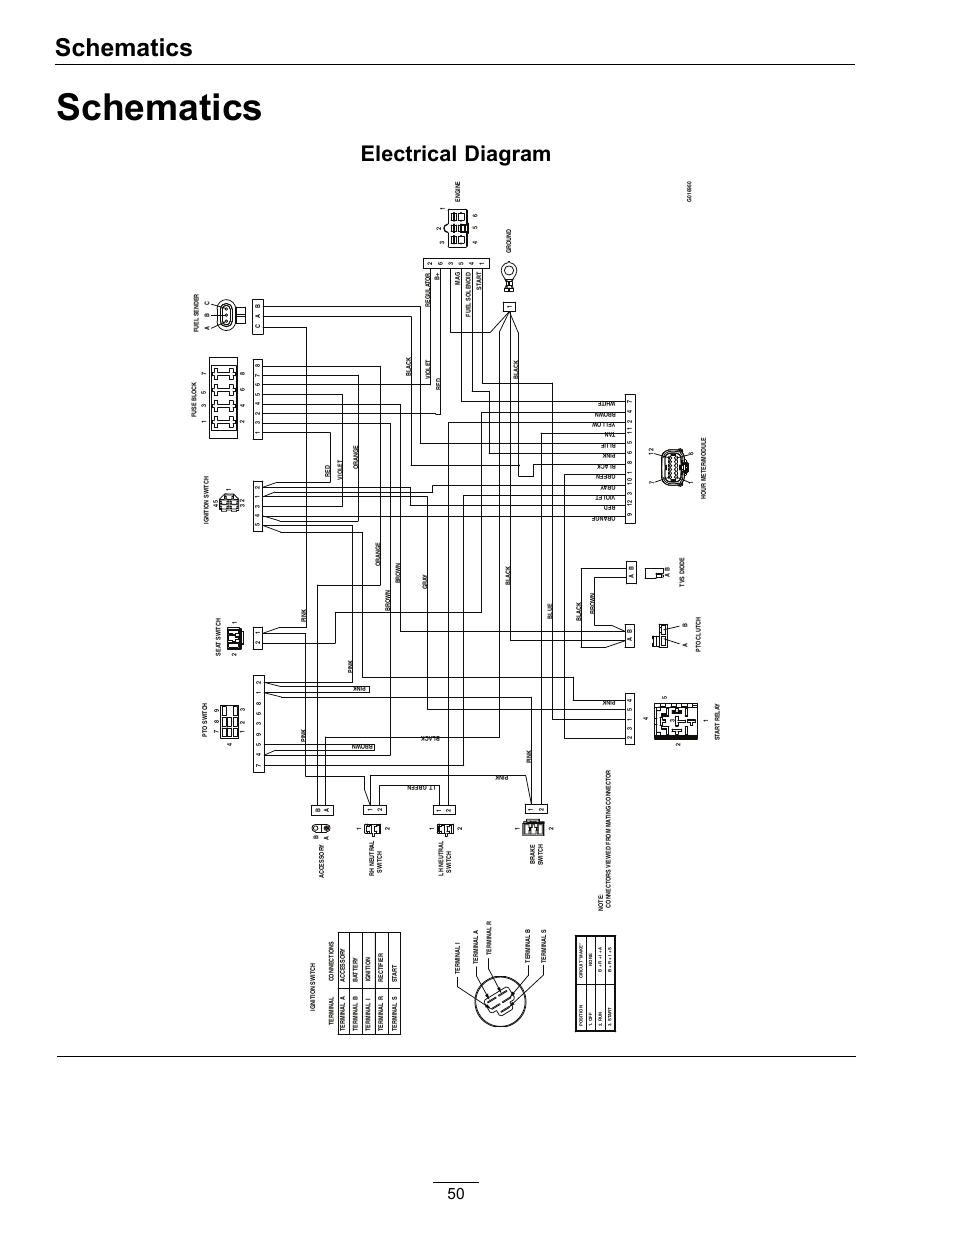 wiring diagram for ceiling fan westinghouse 77075